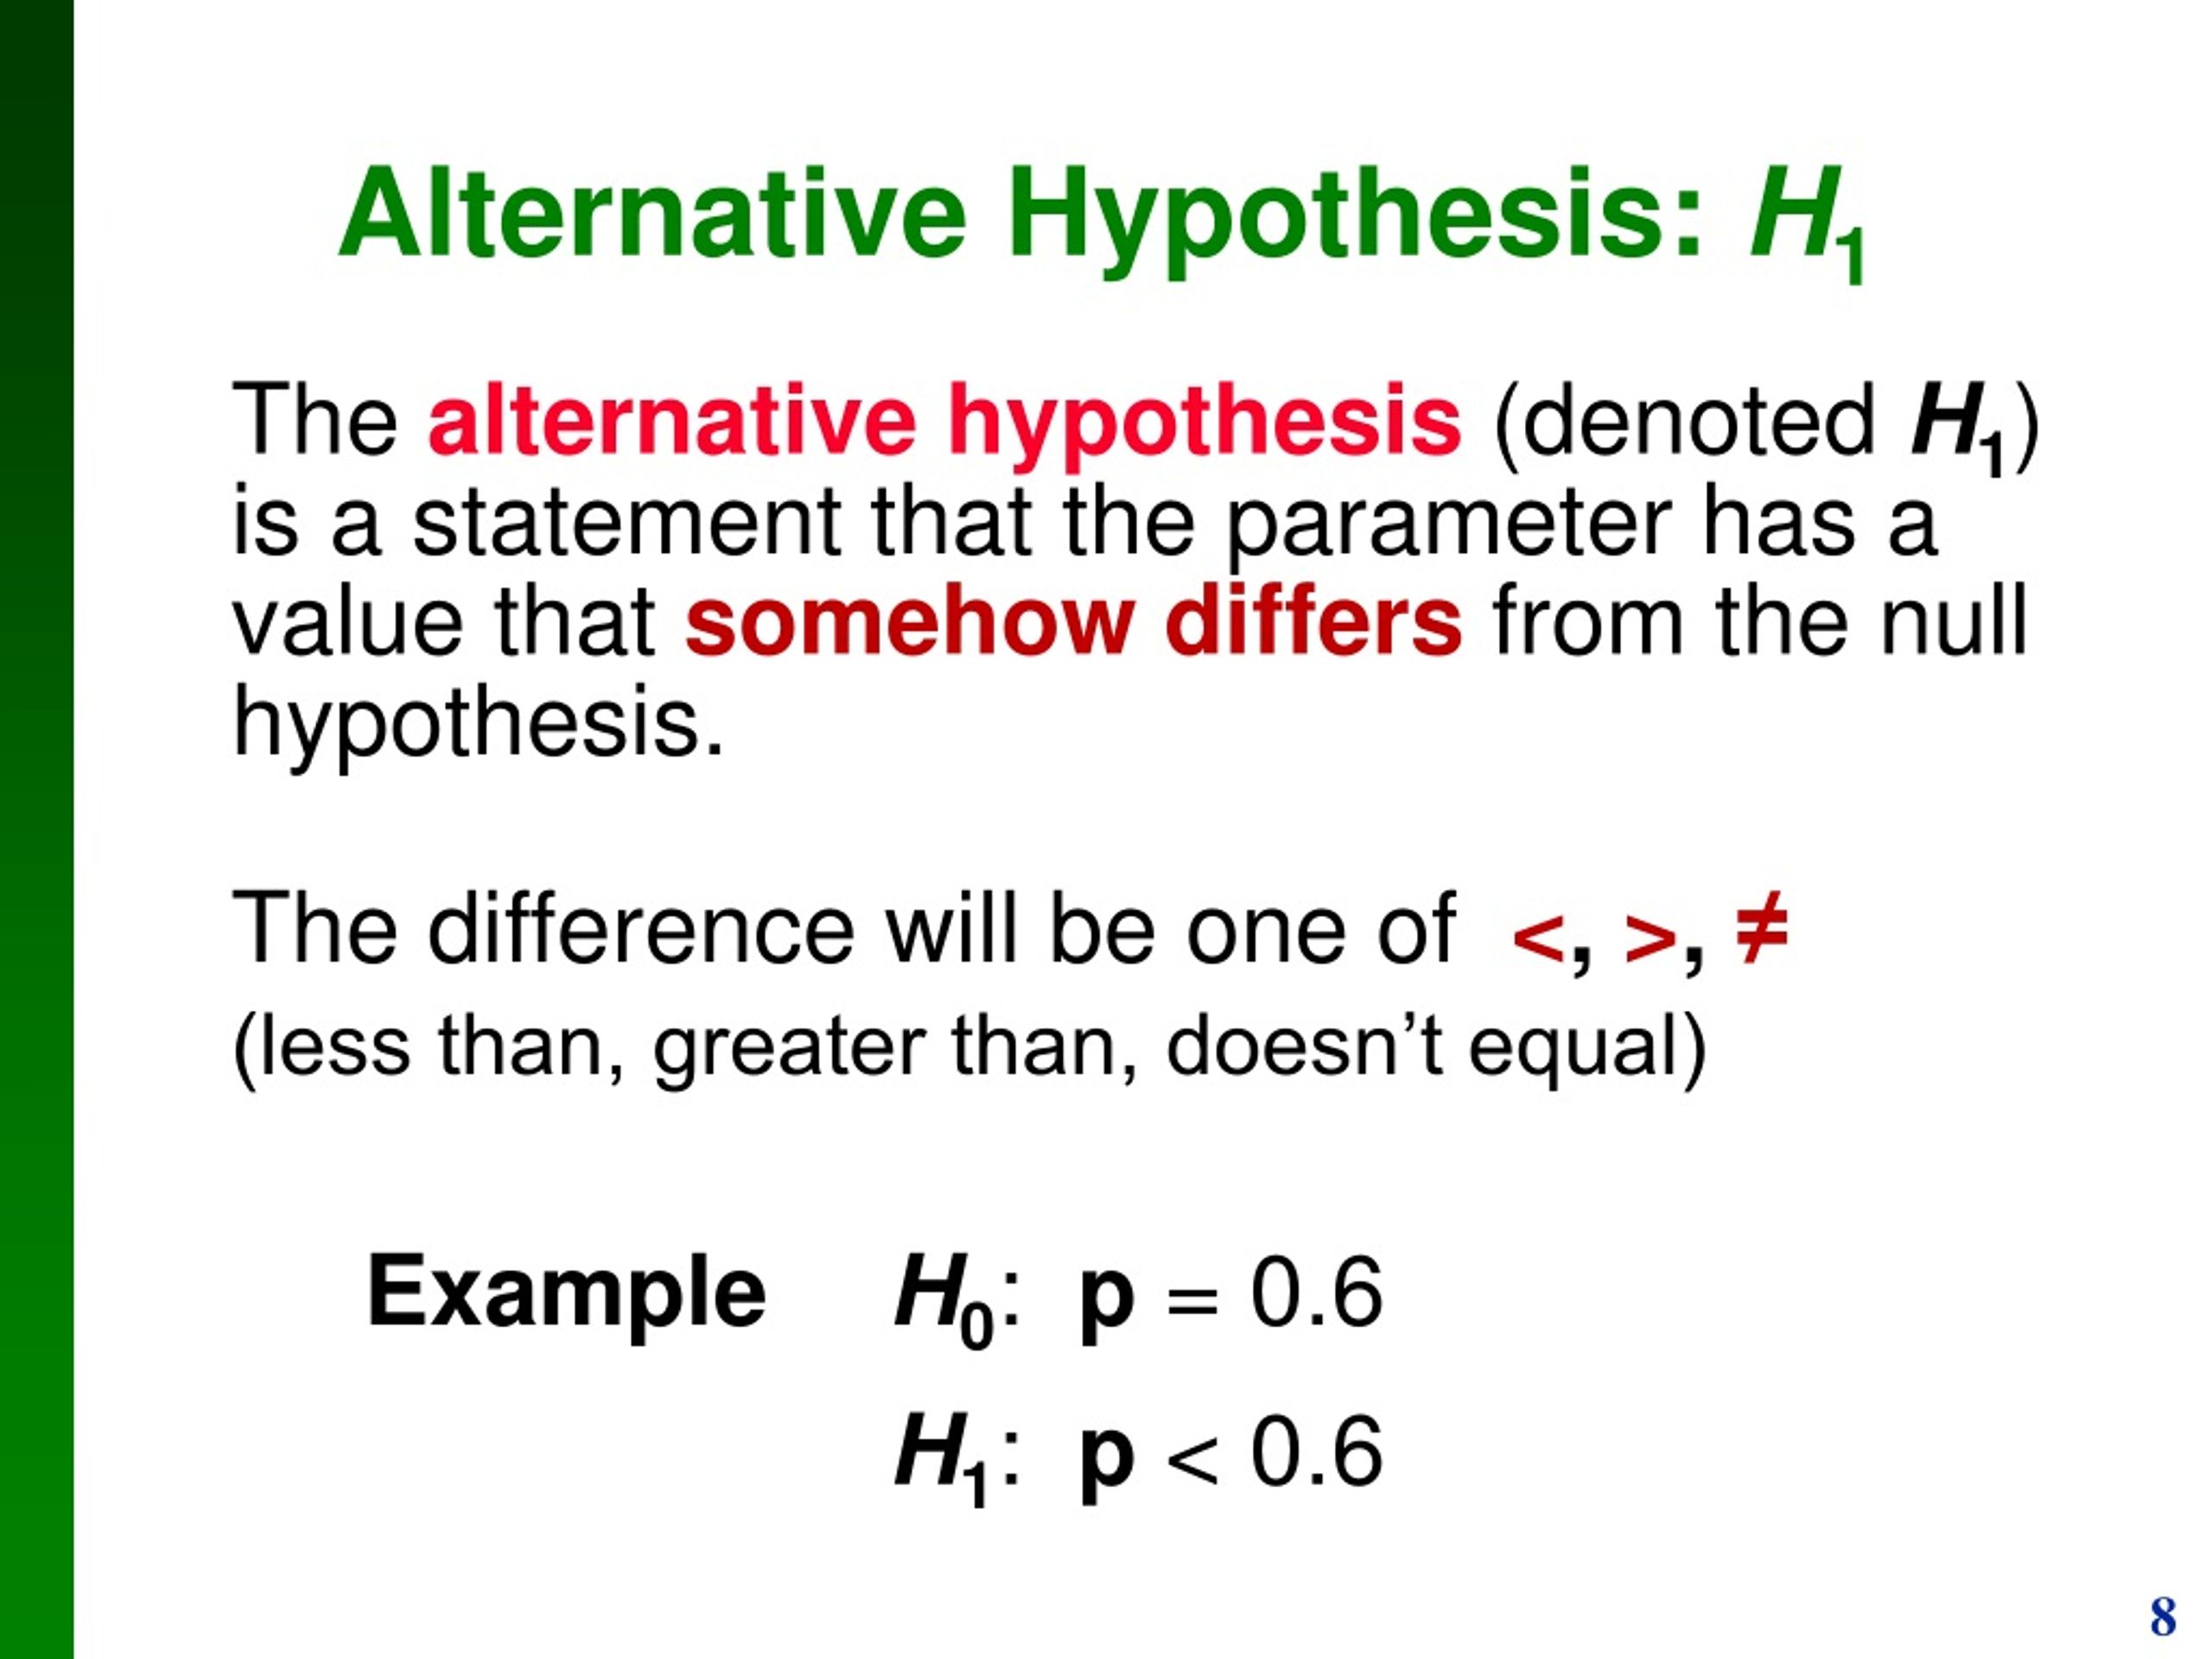 what is the alternative hypothesis states